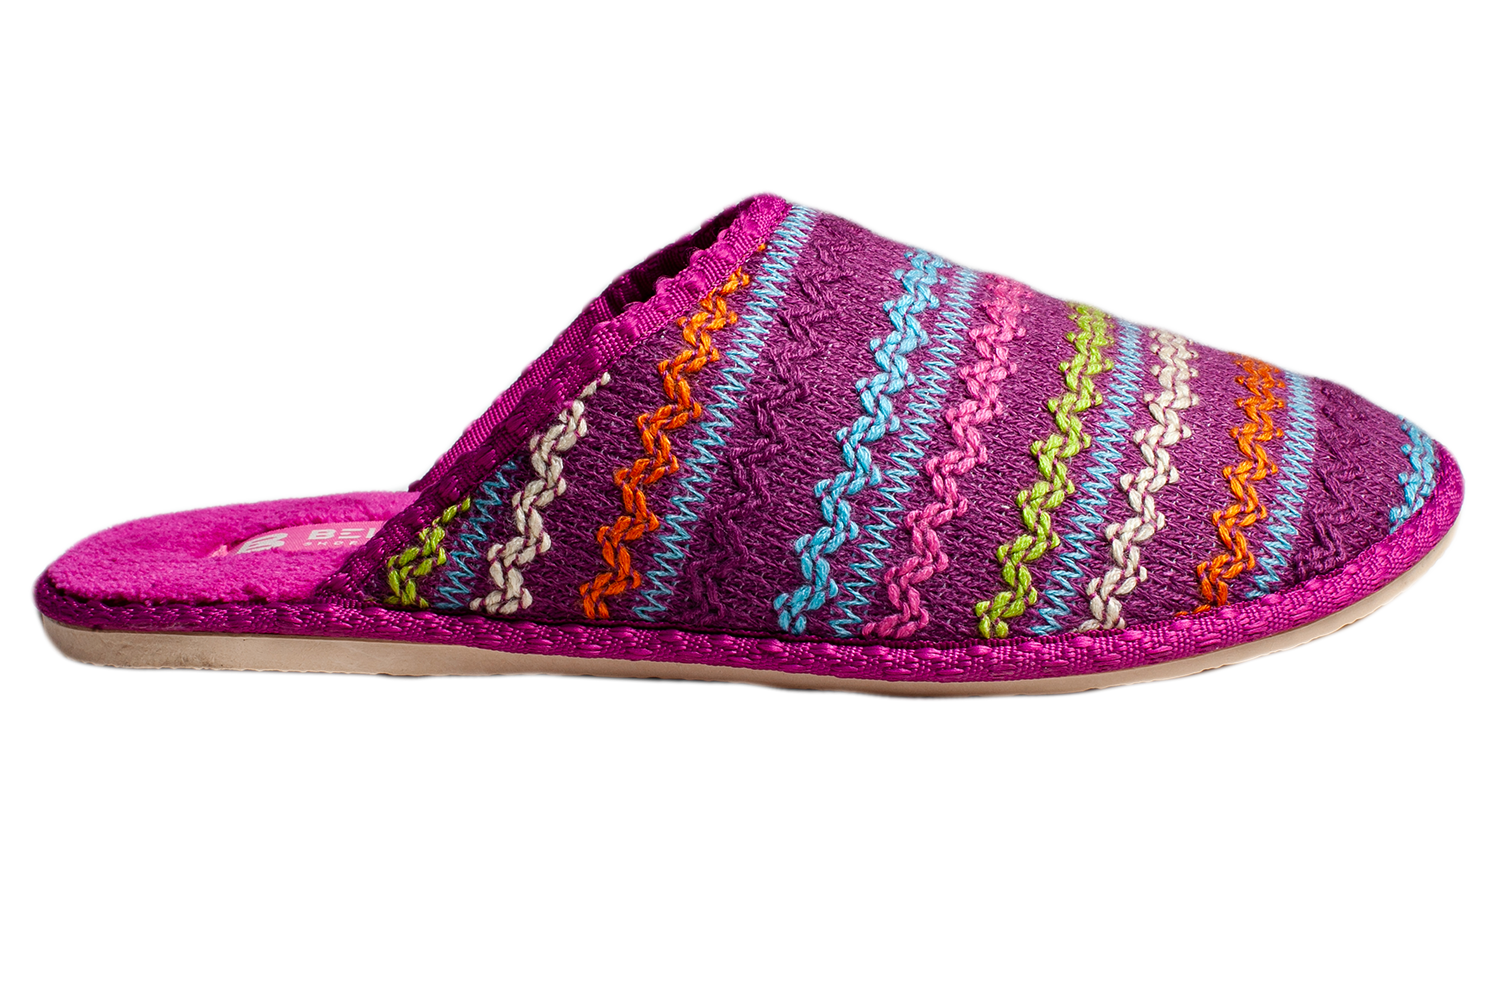 Women's closed slippers BELSTA knitted rainbow - 3